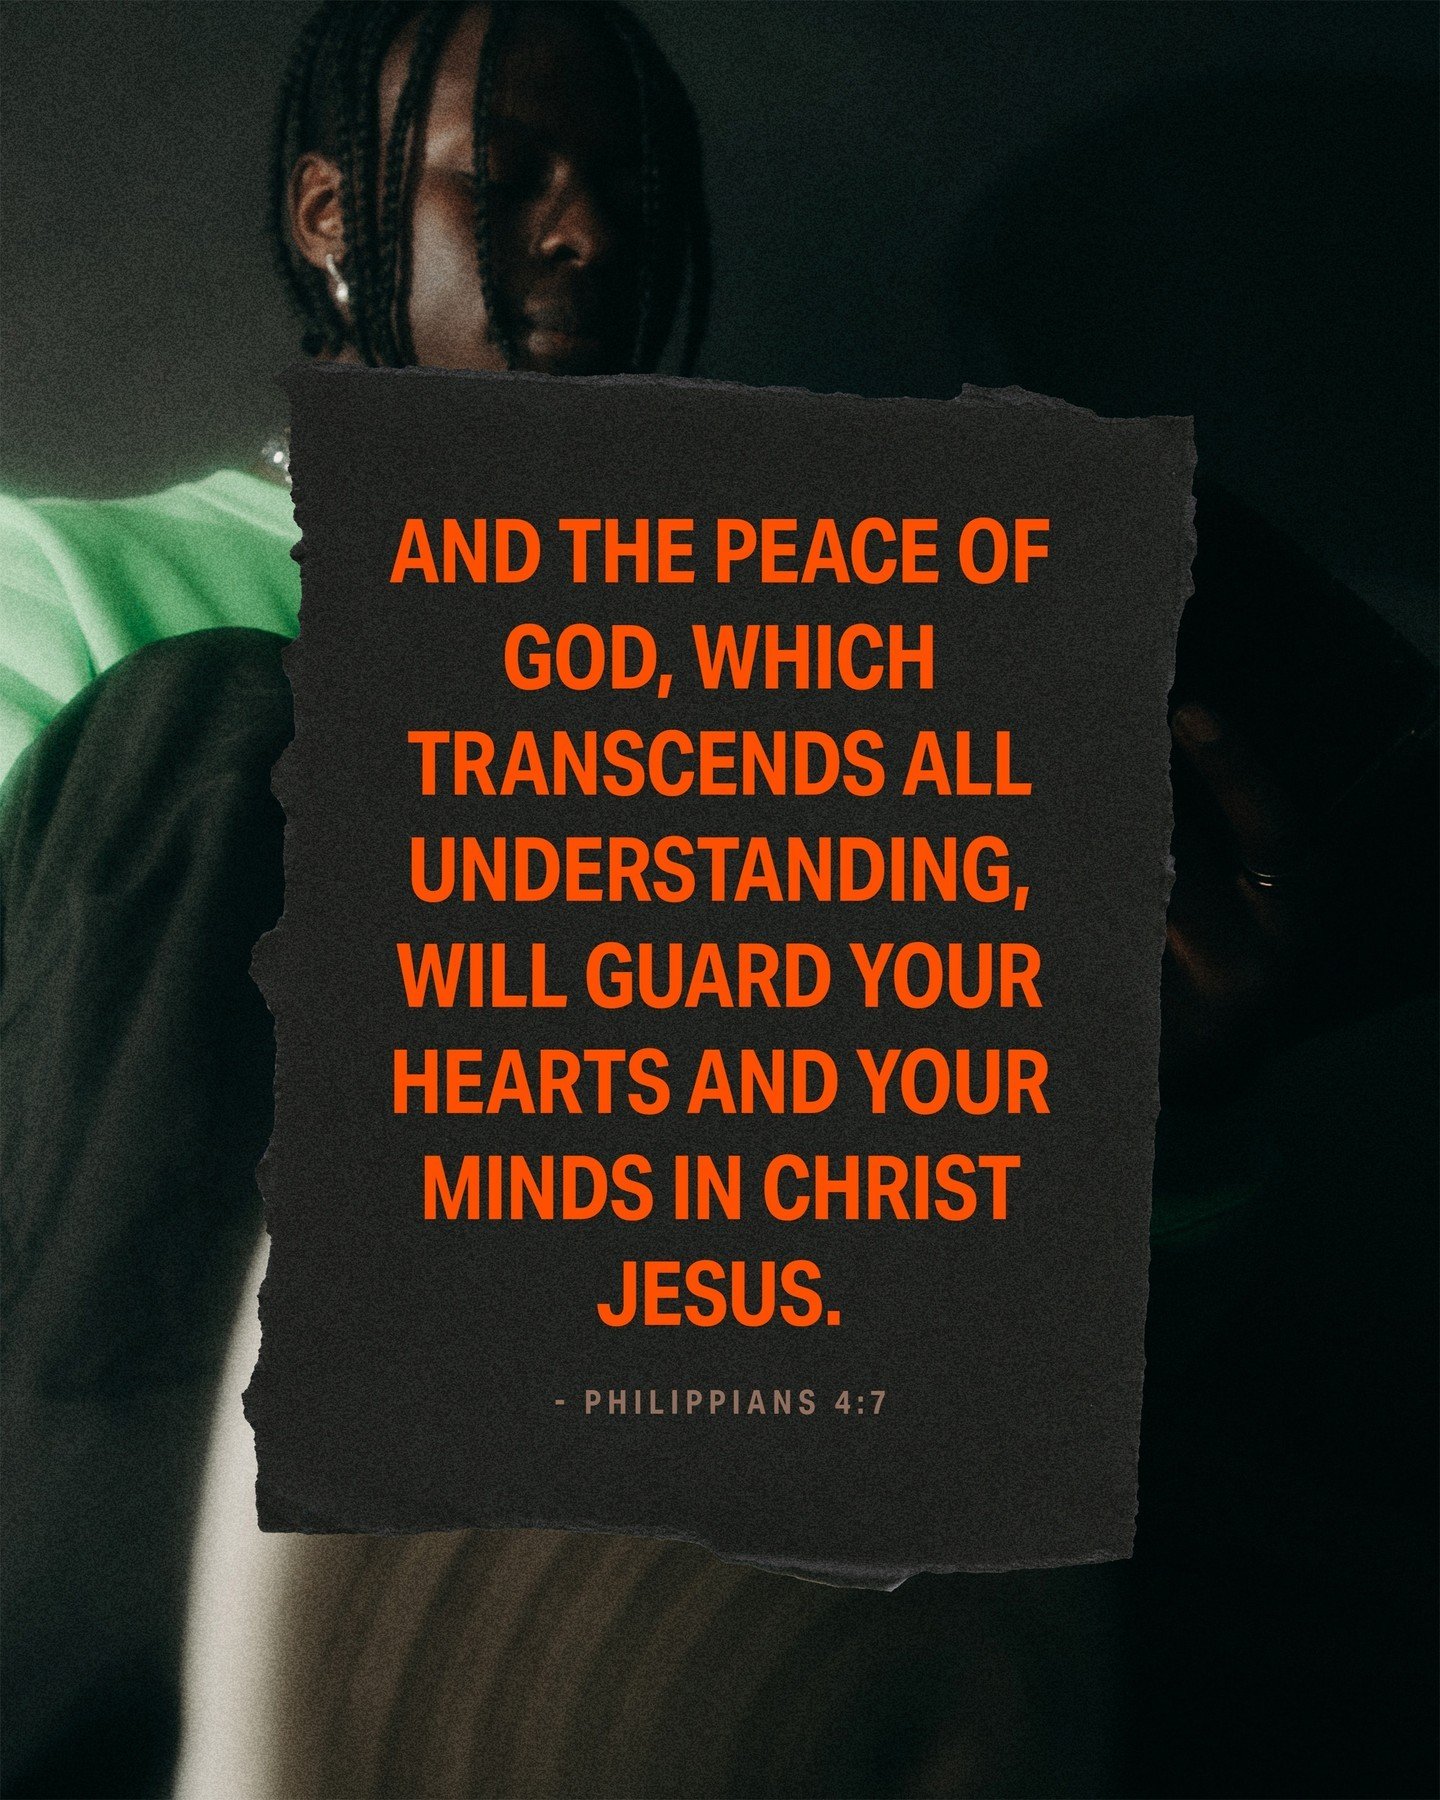 &quot;And the peace of God, which transcends all understanding, will guard your hearts and your minds in Christ Jesus.&quot; - Philippians 4:7
.
.
.
#church #god #morning #jesus #christ #love #christian #worship #bible #philippians